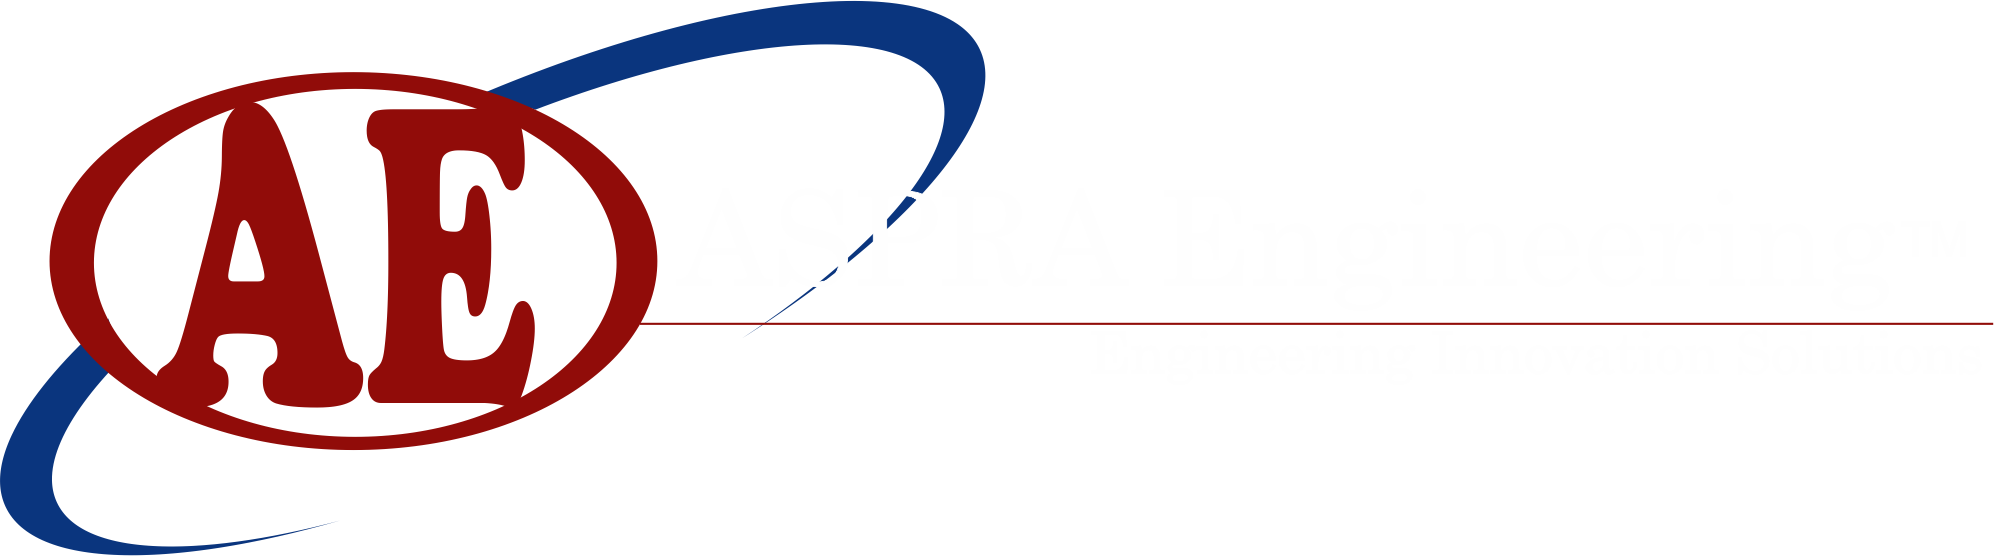 Aspra Engineering India Private Limited